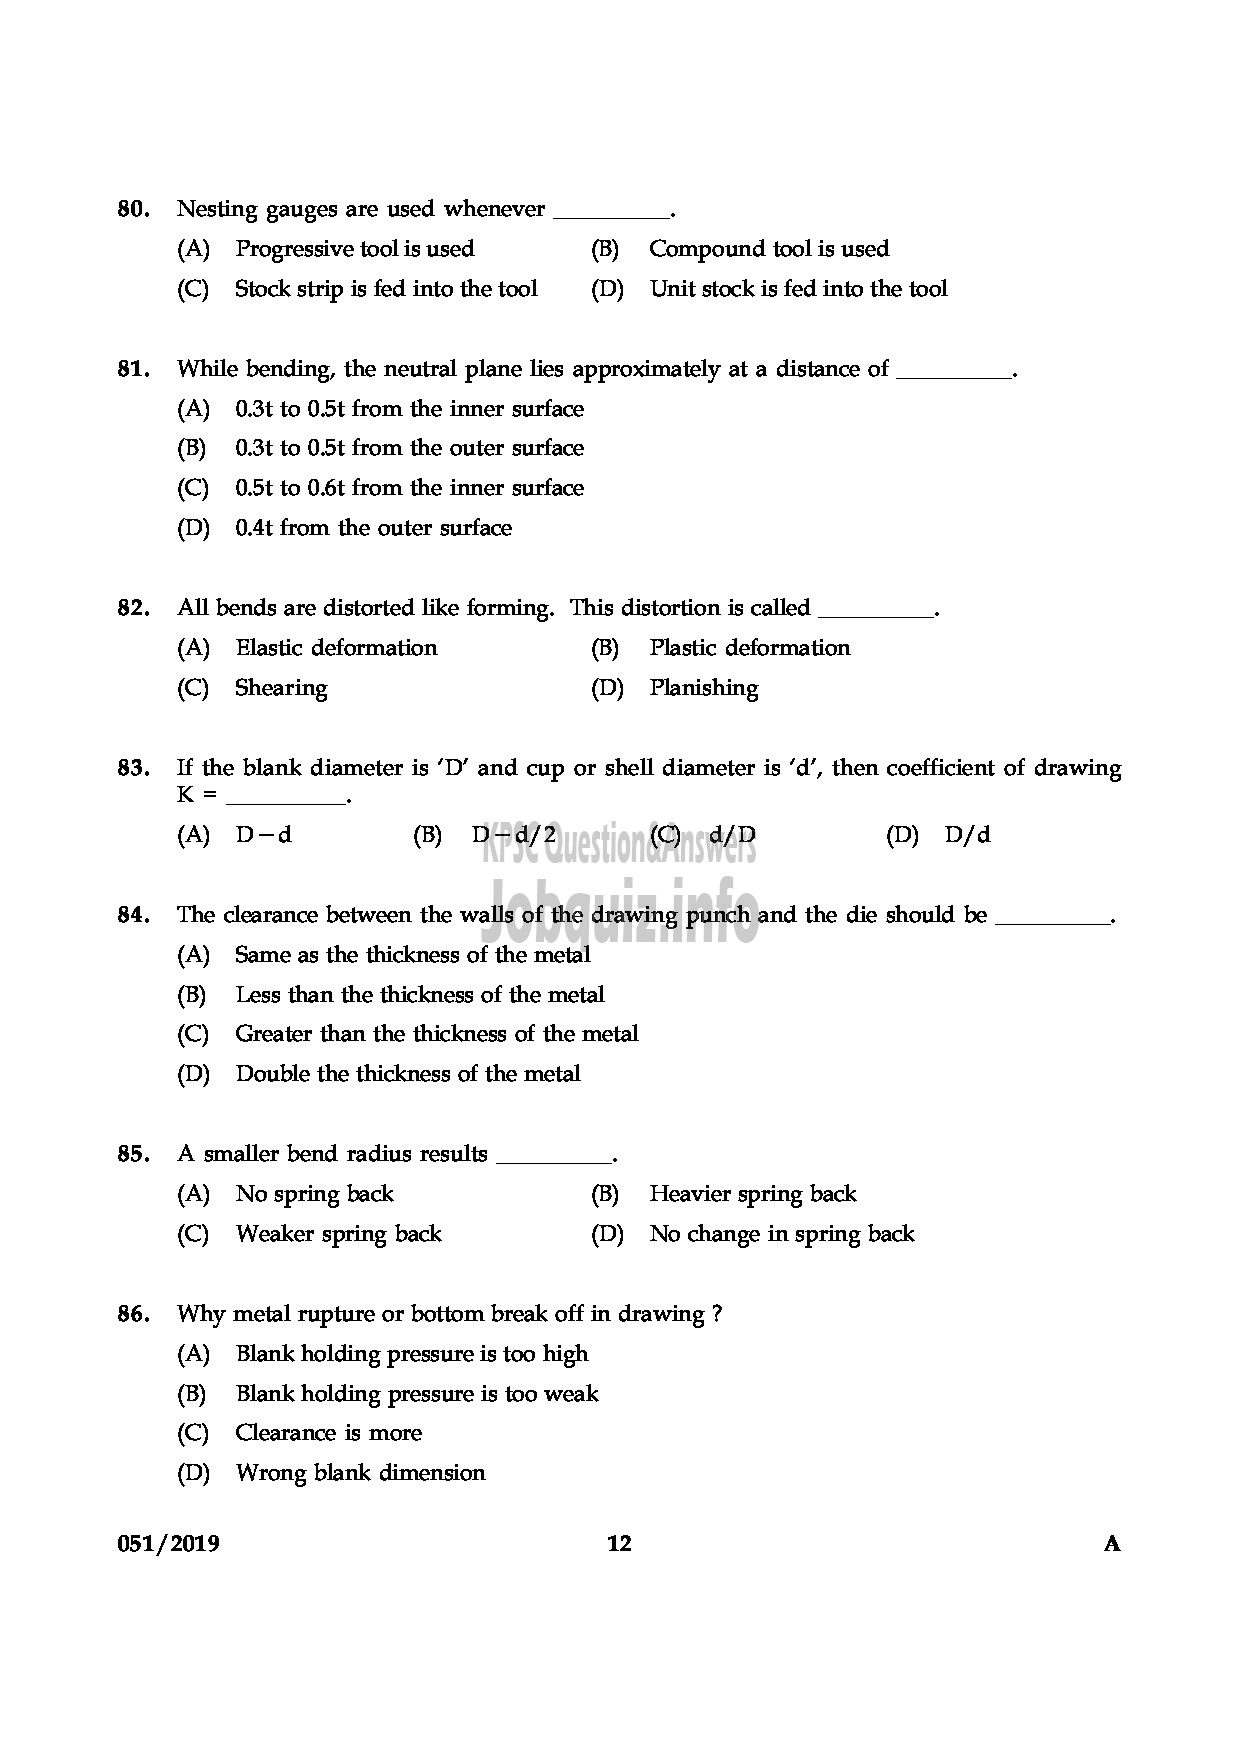 Kerala PSC Question Paper - JUNIOR INSTRUCTOR TOOL & DIE MAKER INDUSTRIAL TRAINING English -12